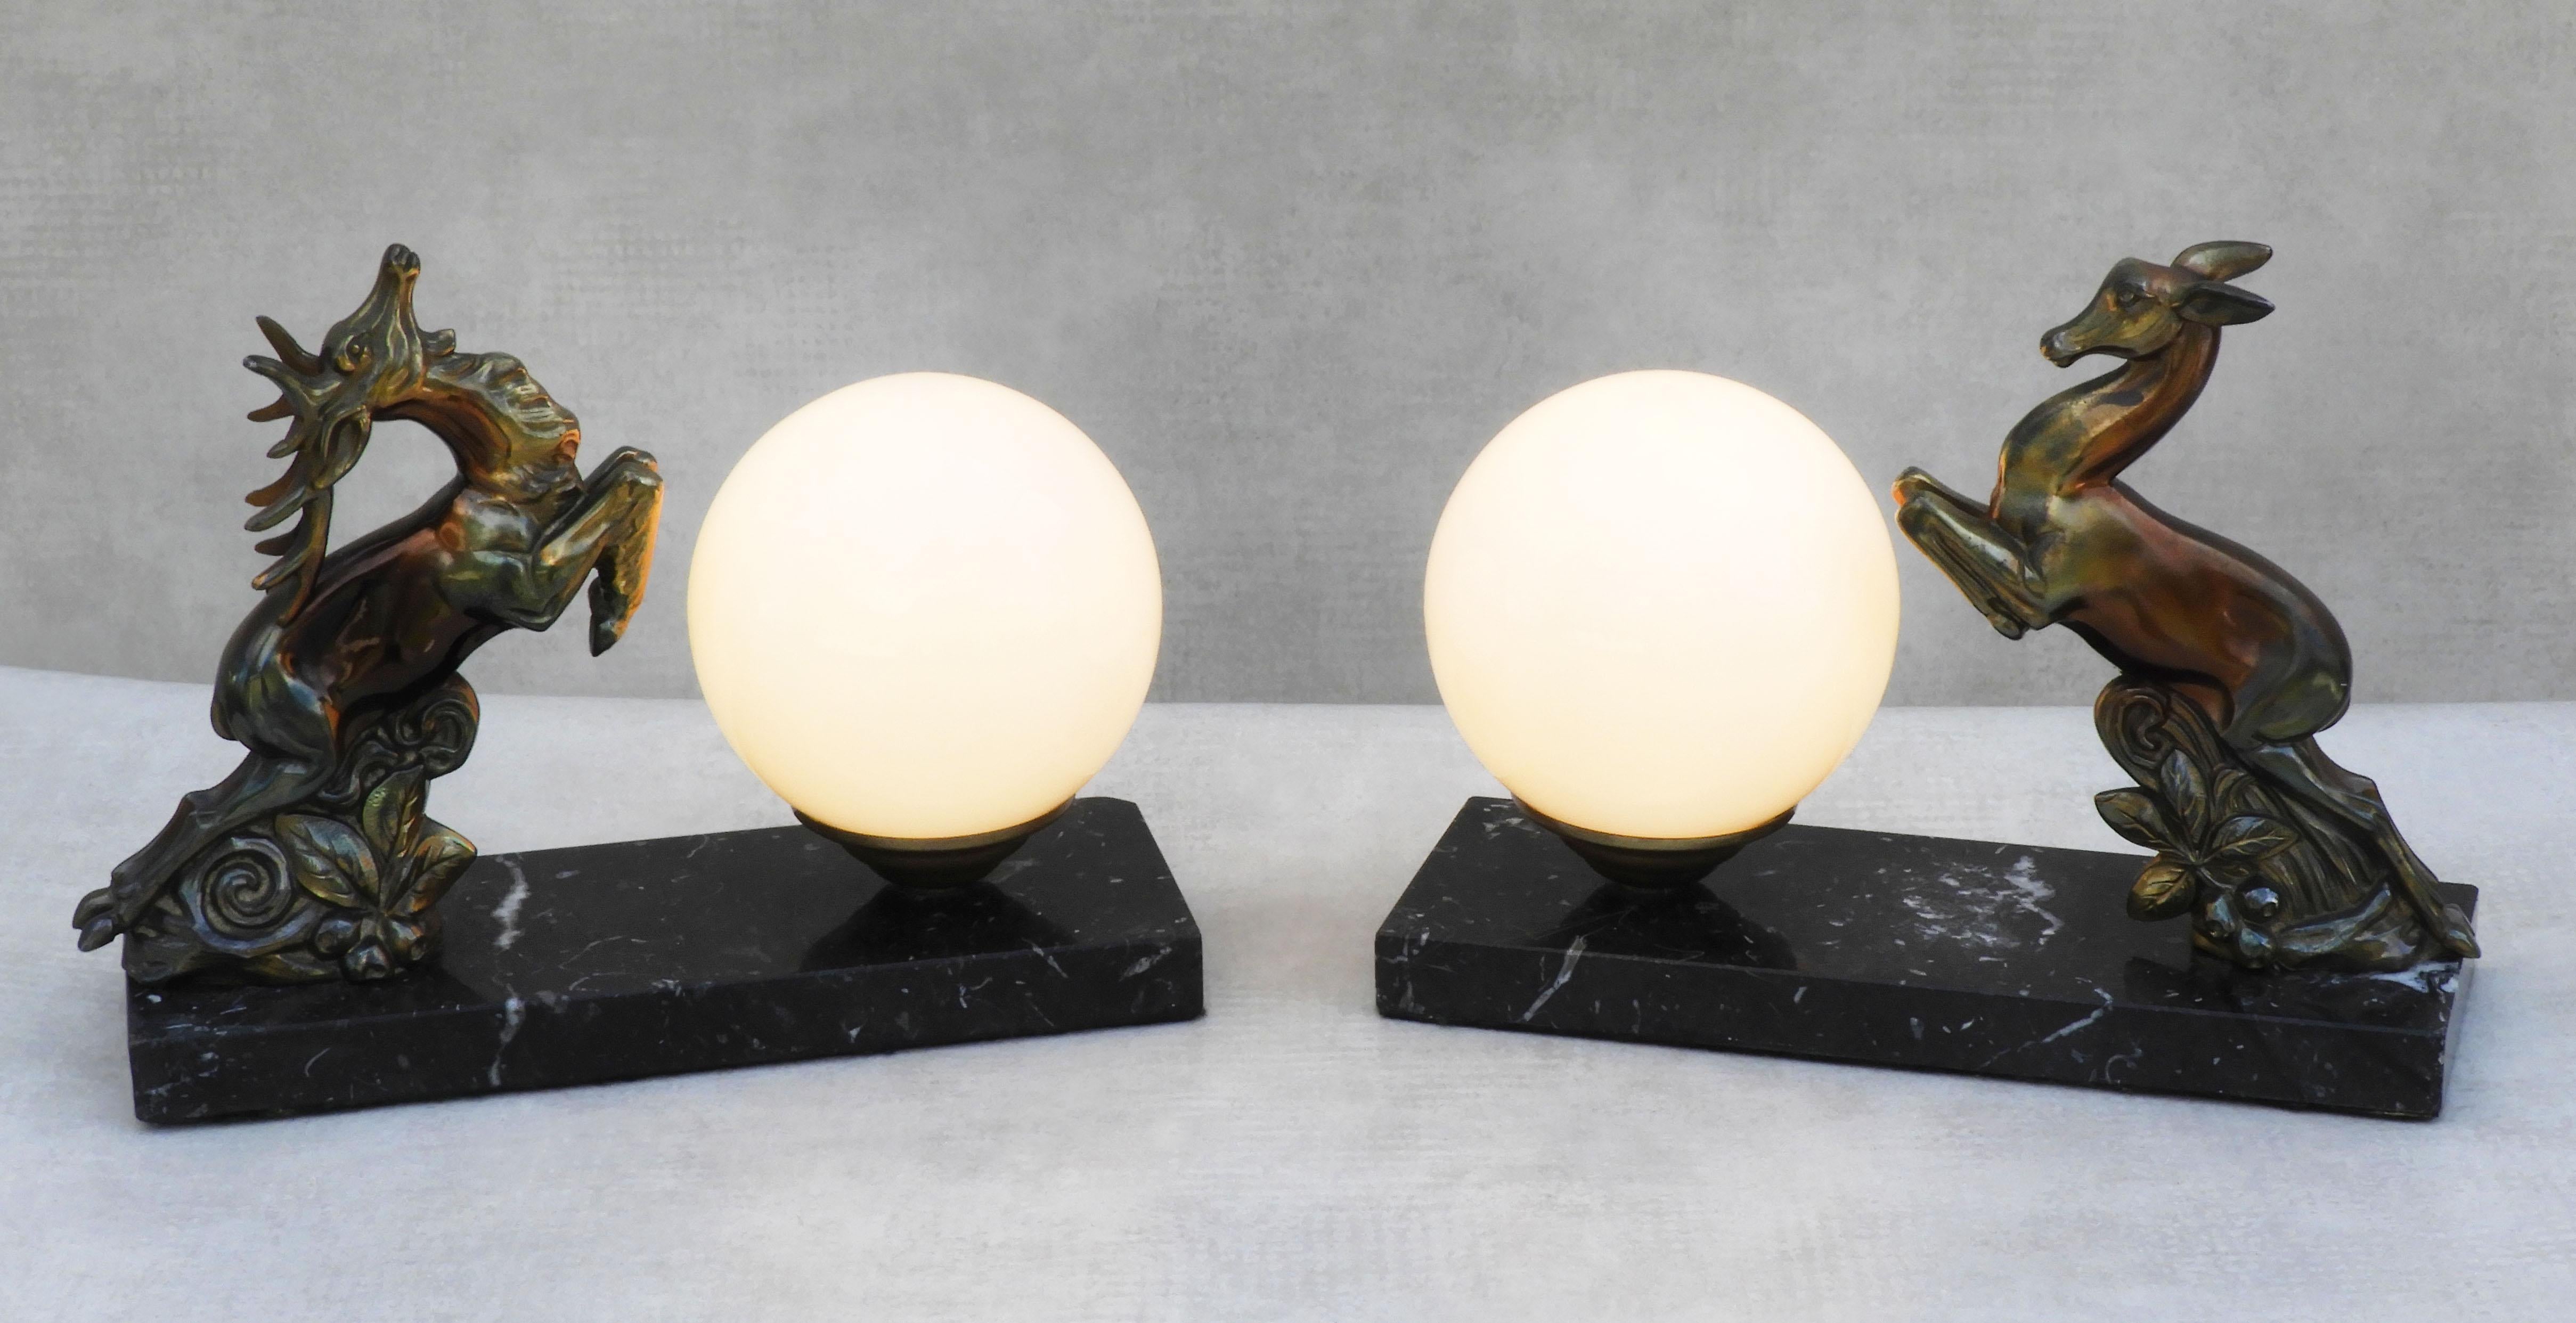 Charming pair of Art Deco 'Deer' table lamps or night-light sculptures from 1930s France. A couple of male and female deer sculptures in iridescent bronzed spelter on marble plinths posed to leap over the opaline glass 'full moon' shades. 
In good